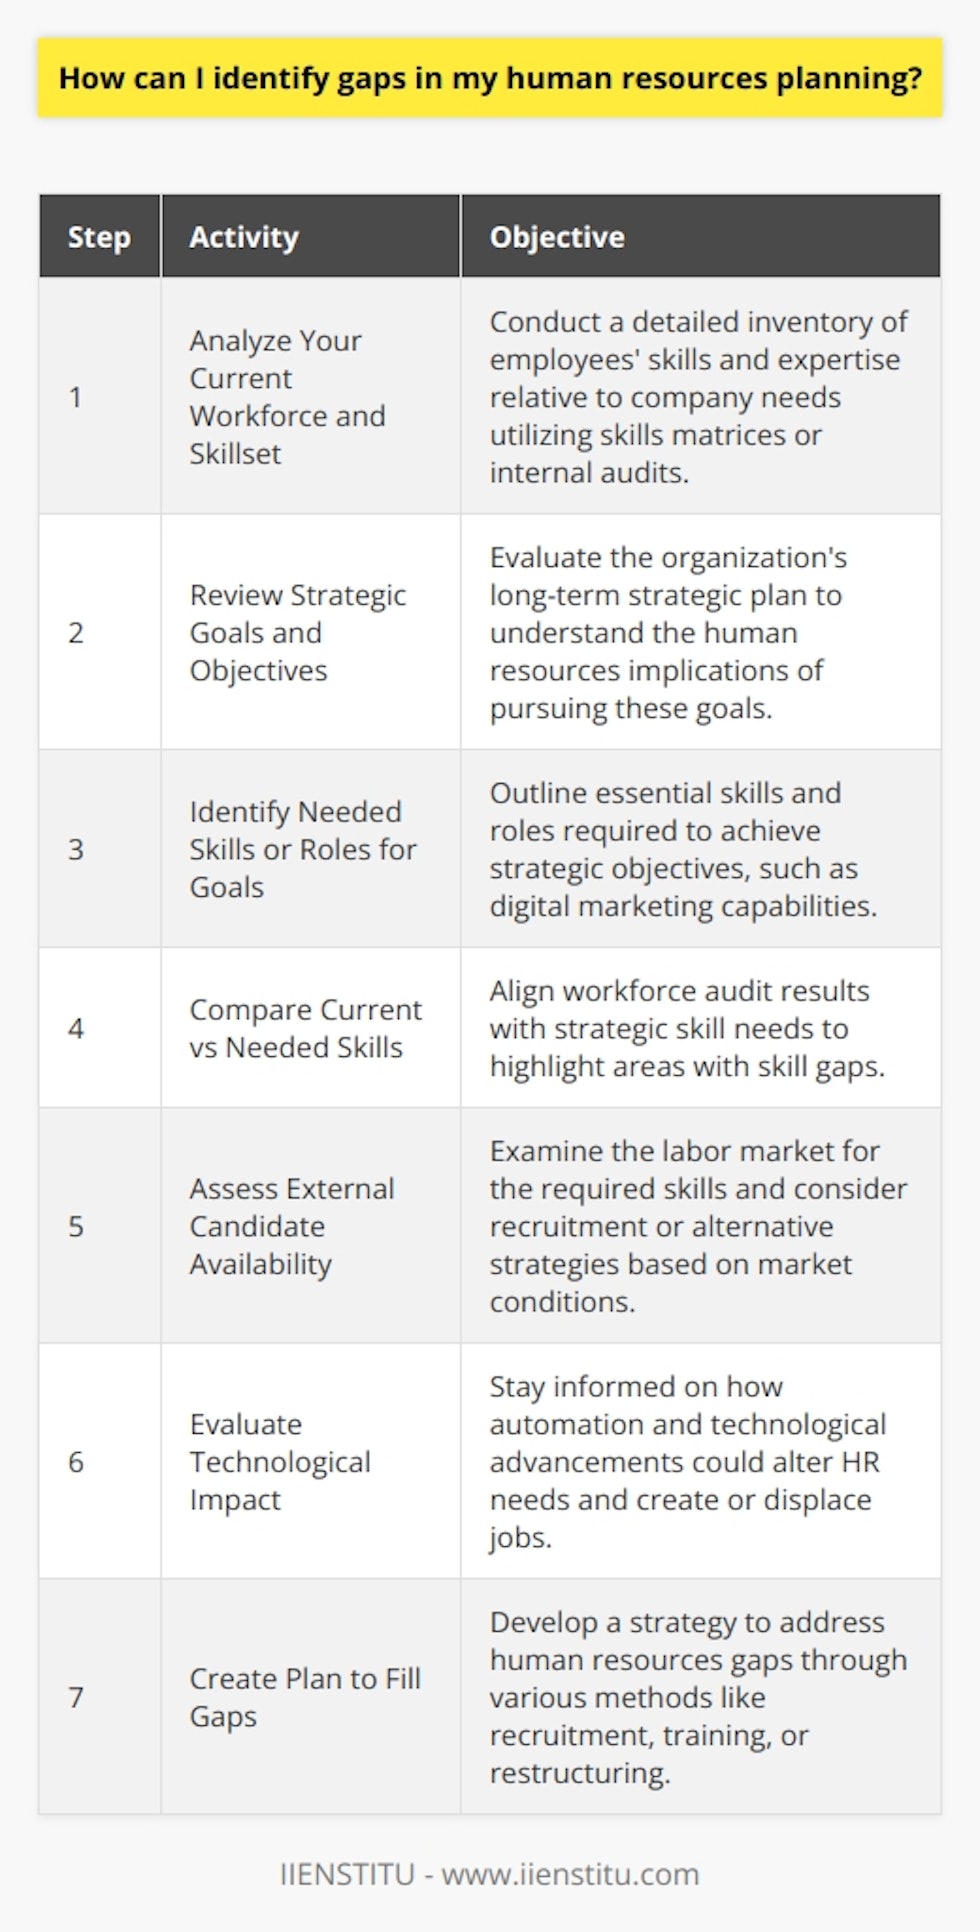 Identifying gaps in human resources planning is an essential part of ensuring that an organization can meet its strategic goals and continue to operate effectively. One critical approach to gap analysis in HR planning is to meticulously assess the current workforce, required skill sets, strategic objectives, and market conditions. Here is a focused guide on how to identify these gaps:1. **Analyze Your Current Workforce and Skillset**: Begin by taking a comprehensive inventory of your current employees' experience, education, skills, and areas of expertise. This step should involve not just a superficial look at job titles, but a deep dive into what each employee is actually doing and how their contributions align with your company’s needs. Tools such as skills matrices or internal audits can help identify not only the available skills but also areas where skills may be lacking.2. **Review Your Organization’s Strategic Goals and Objectives**: To understand where your human resources need to be, you should first have a clear picture of where your business is headed. Review your organization´s long-term strategic plan, including market expansion, product development, or operational improvements. Every strategic goal should have clear human resources implications.3. **Identify Any Skills or Roles That Are Needed to Achieve Those Goals**: With your strategic goals in mind, you can now outline what skills, knowledge, or roles will be necessary to meet these objectives. For example, if a goal is to increase your digital marketing presence, you may need skills in social media management, content production, or analytics.4. **Compare the Skills of Your Current Employees to Those Needed to Achieve the Goals**: This is where you align your workforce audit results with your strategic skill needs. It may involve mapping out where there is a mismatch between current capabilities and future needs. This comparison will highlight the skills gaps directly.5. **Assess the Availability of Qualified External Candidates in the Job Market**: Sometimes, the skills you need are not readily available within your current workforce. When this is the case, you need to look externally. However, it’s important to understand the labor market landscape for these skills. A skills shortage in the job market will make it more difficult to recruit the right talent and may necessitate considering alternate strategies such as training existing staff or exploring international hires.6. **Consider the Potential Impact of Automation and Other Technological Advancements**: The workforce landscape is constantly changing, especially with the integration of new technology. Automation, artificial intelligence, and other technology trends can both displace jobs and create new roles. It's essential to stay ahead by understanding how these advancements could affect your HR needs. Some roles may be automated in the future, while others will require new skills to work alongside emerging technologies.7. **Create a Plan to Fill Any Identified Gaps in Human Resources**: With a clear picture of the gaps within your human resources, you can now create a strategic plan to address these shortages. This may involve a combination of approaches including recruitment drives, upskilling or reskilling current employees, utilizing temporary or contract workers, or restructuring roles and responsibilities within the business.Institutes like IIENSTITU provide resources and courses that can help your existing workforce upskill to meet the evolving demands of your organizational strategy. Additionally, these institutions can play a role in equipping HR professionals with the tools and frameworks to perform effective gap analyses and implement robust HR planning strategies.Executing this gap analysis periodically as part of your strategic HR planning process will ensure the organization adapts and scales efficiently in response to internal and external forces and remains competitive in its industry.